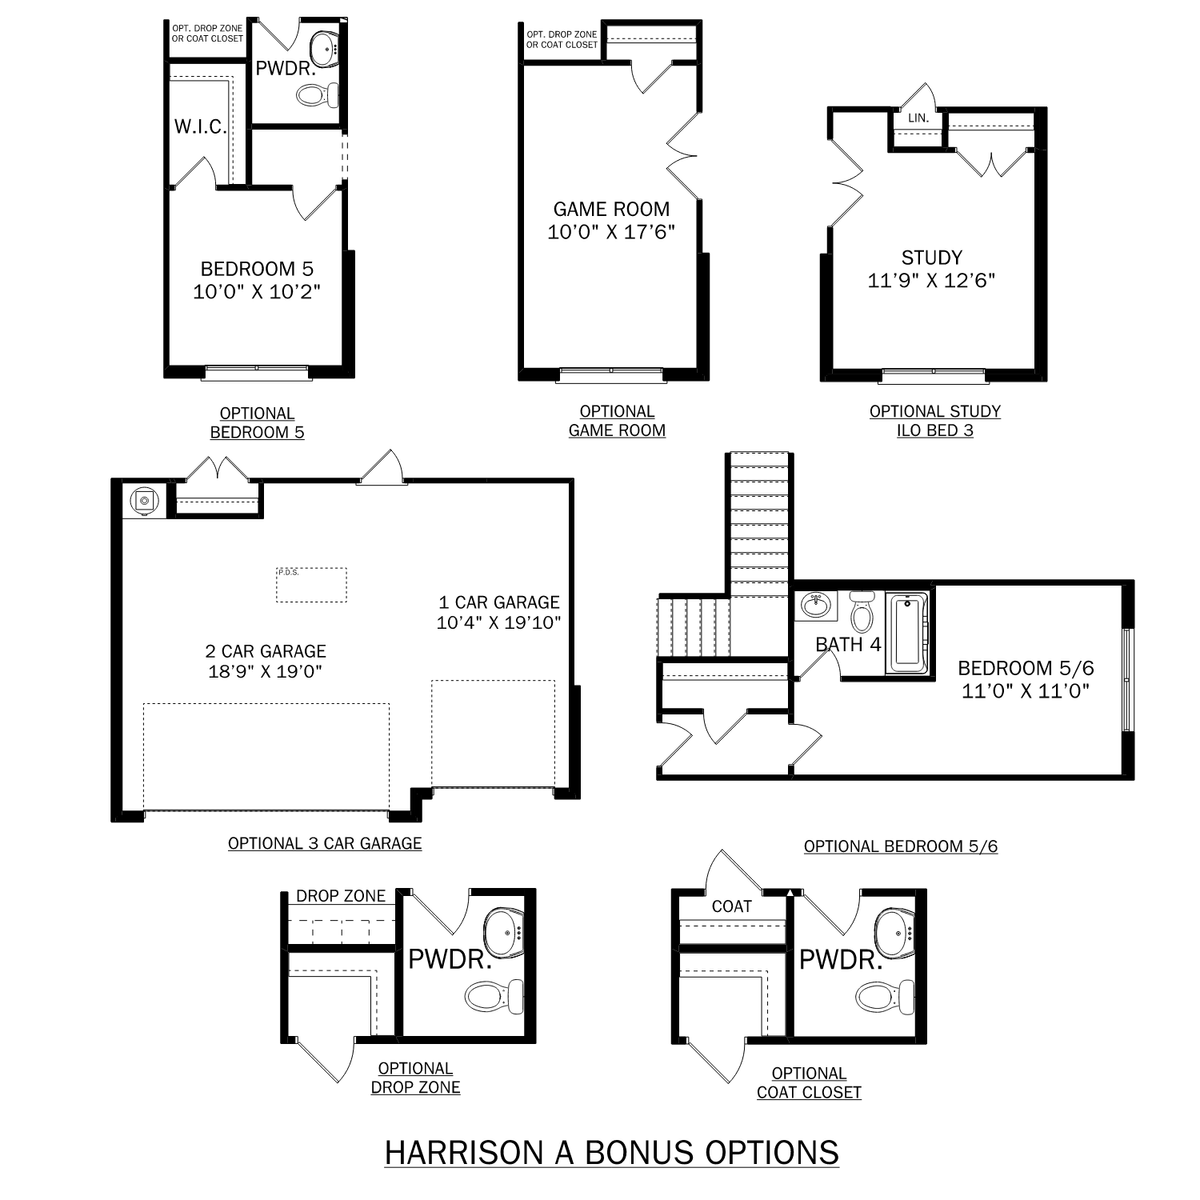 3 - The Harrison with Bonus buildable floor plan layout in Davidson Homes' Pikes Ridge community.